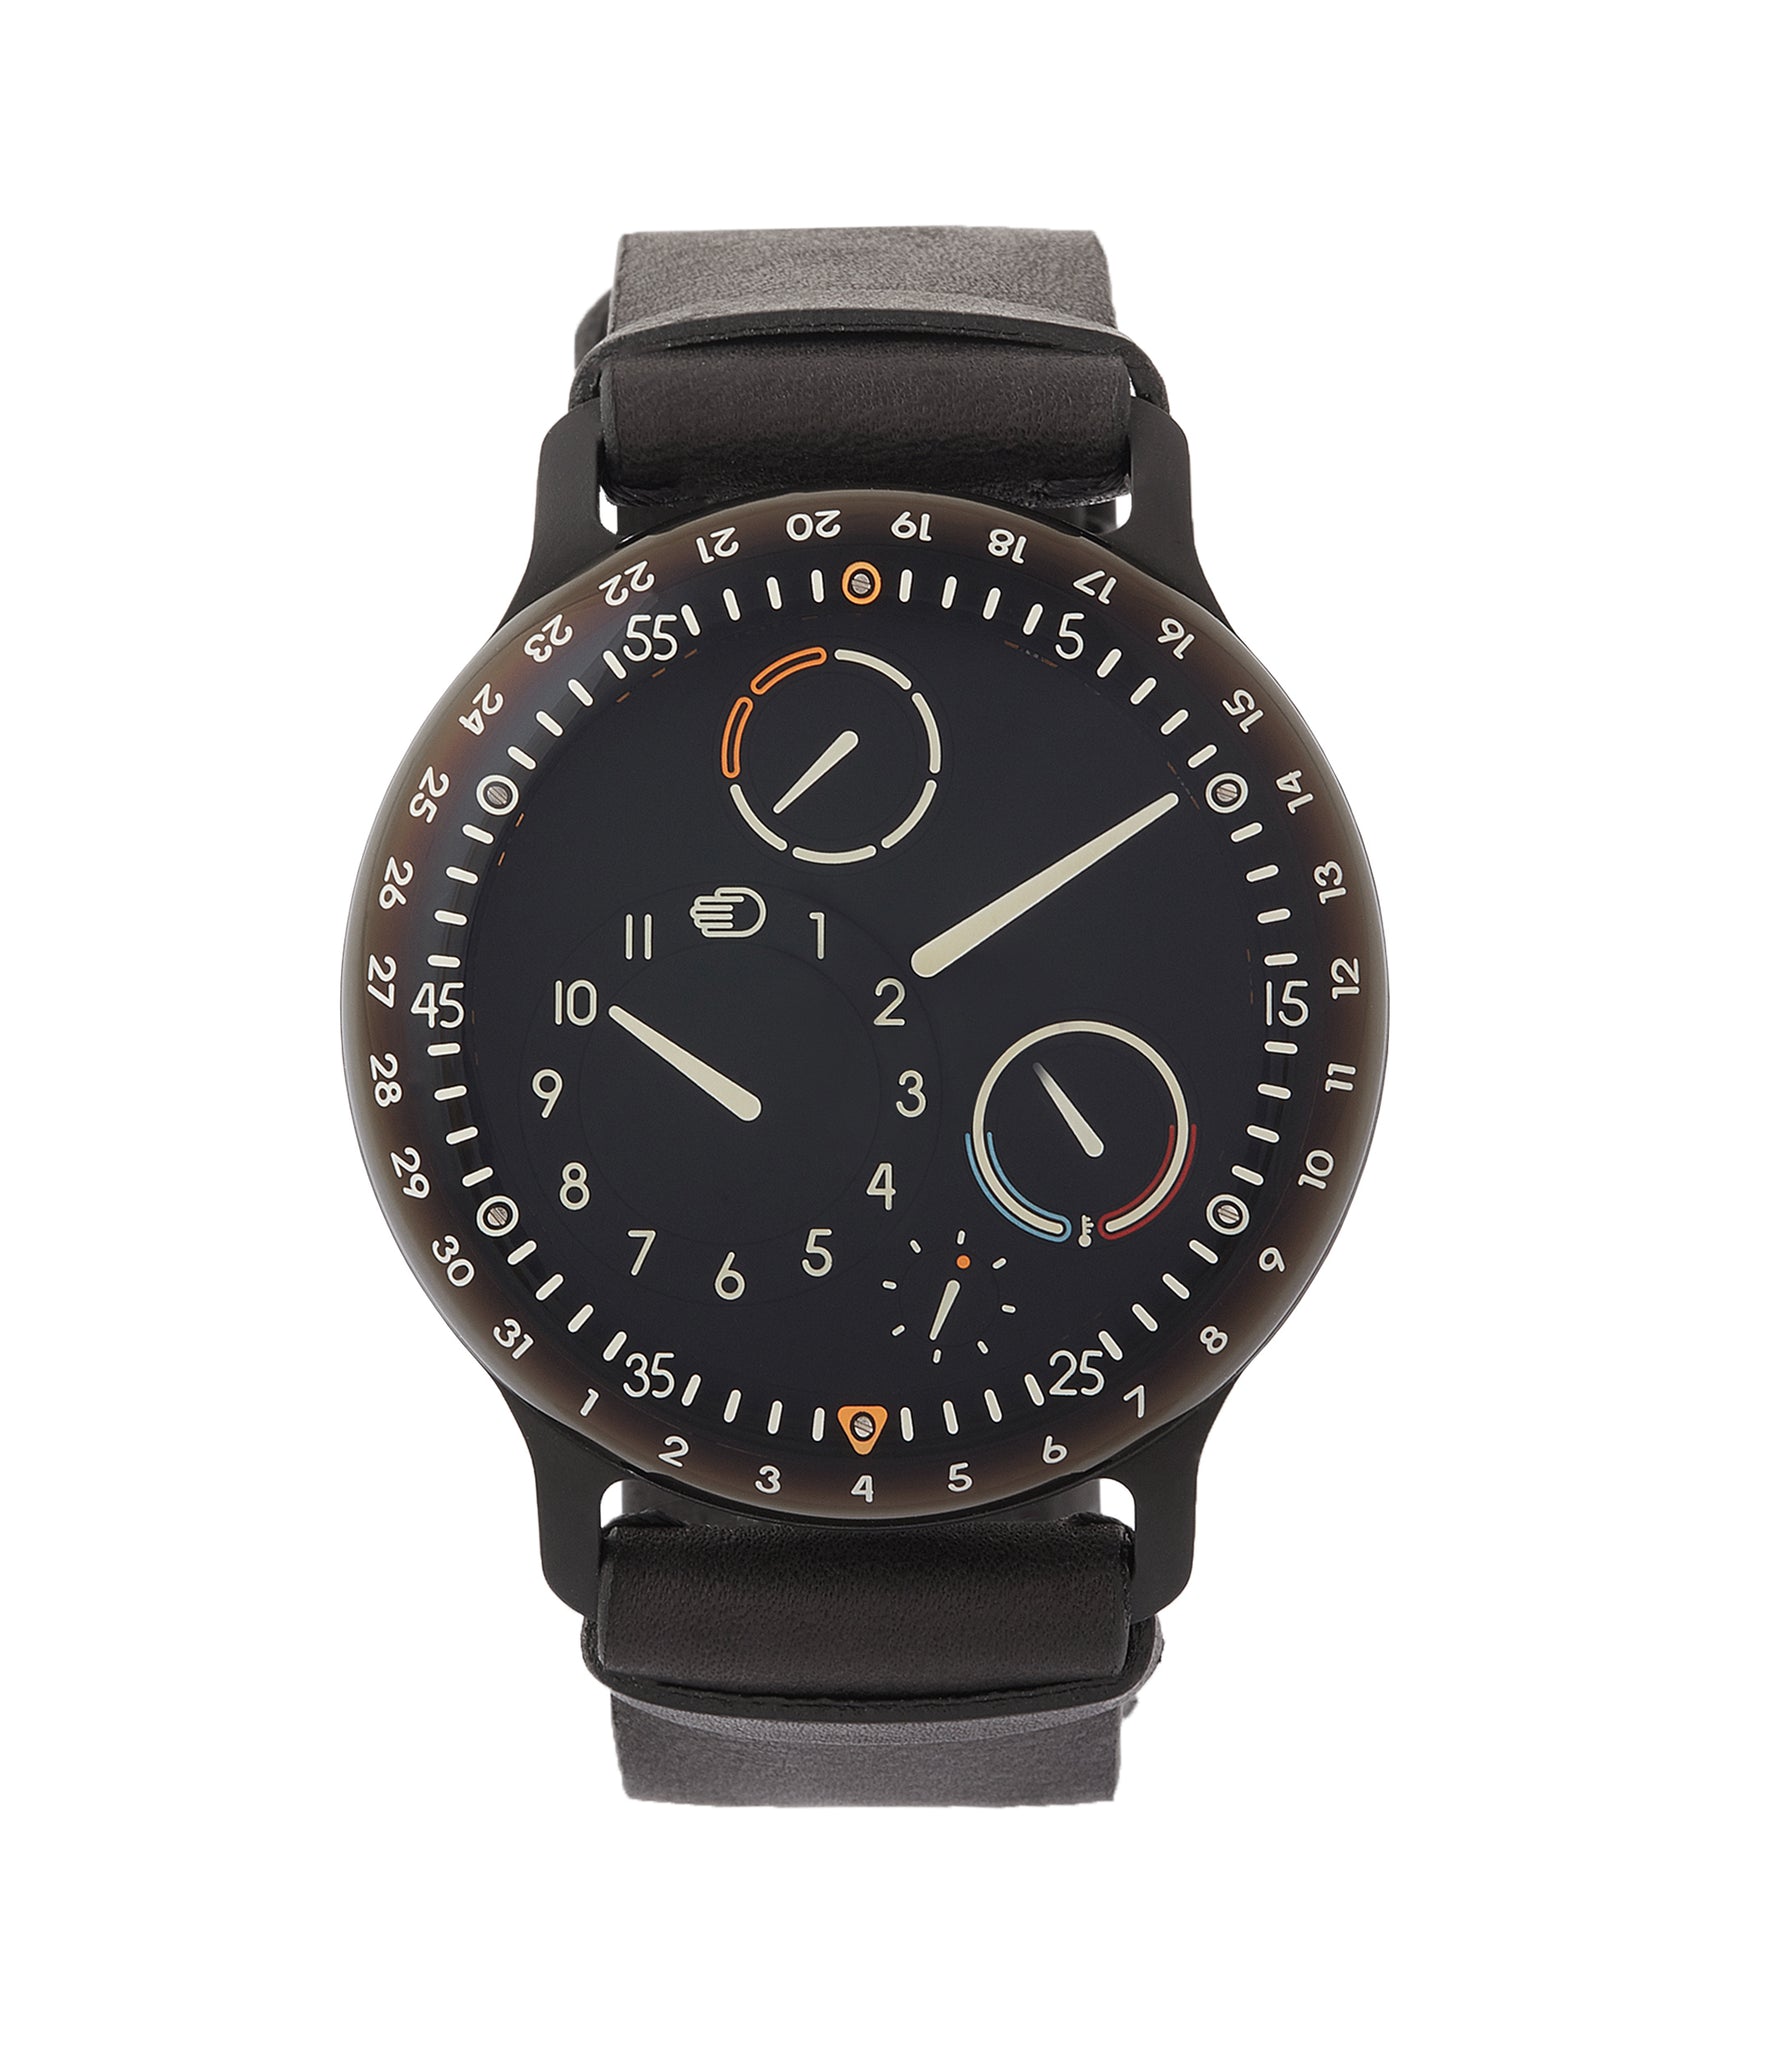 buy Ressence Type 3BB titanium oil-filled titanium luxury sports watch for sale at A Collected Man London UK specialist of rare watches